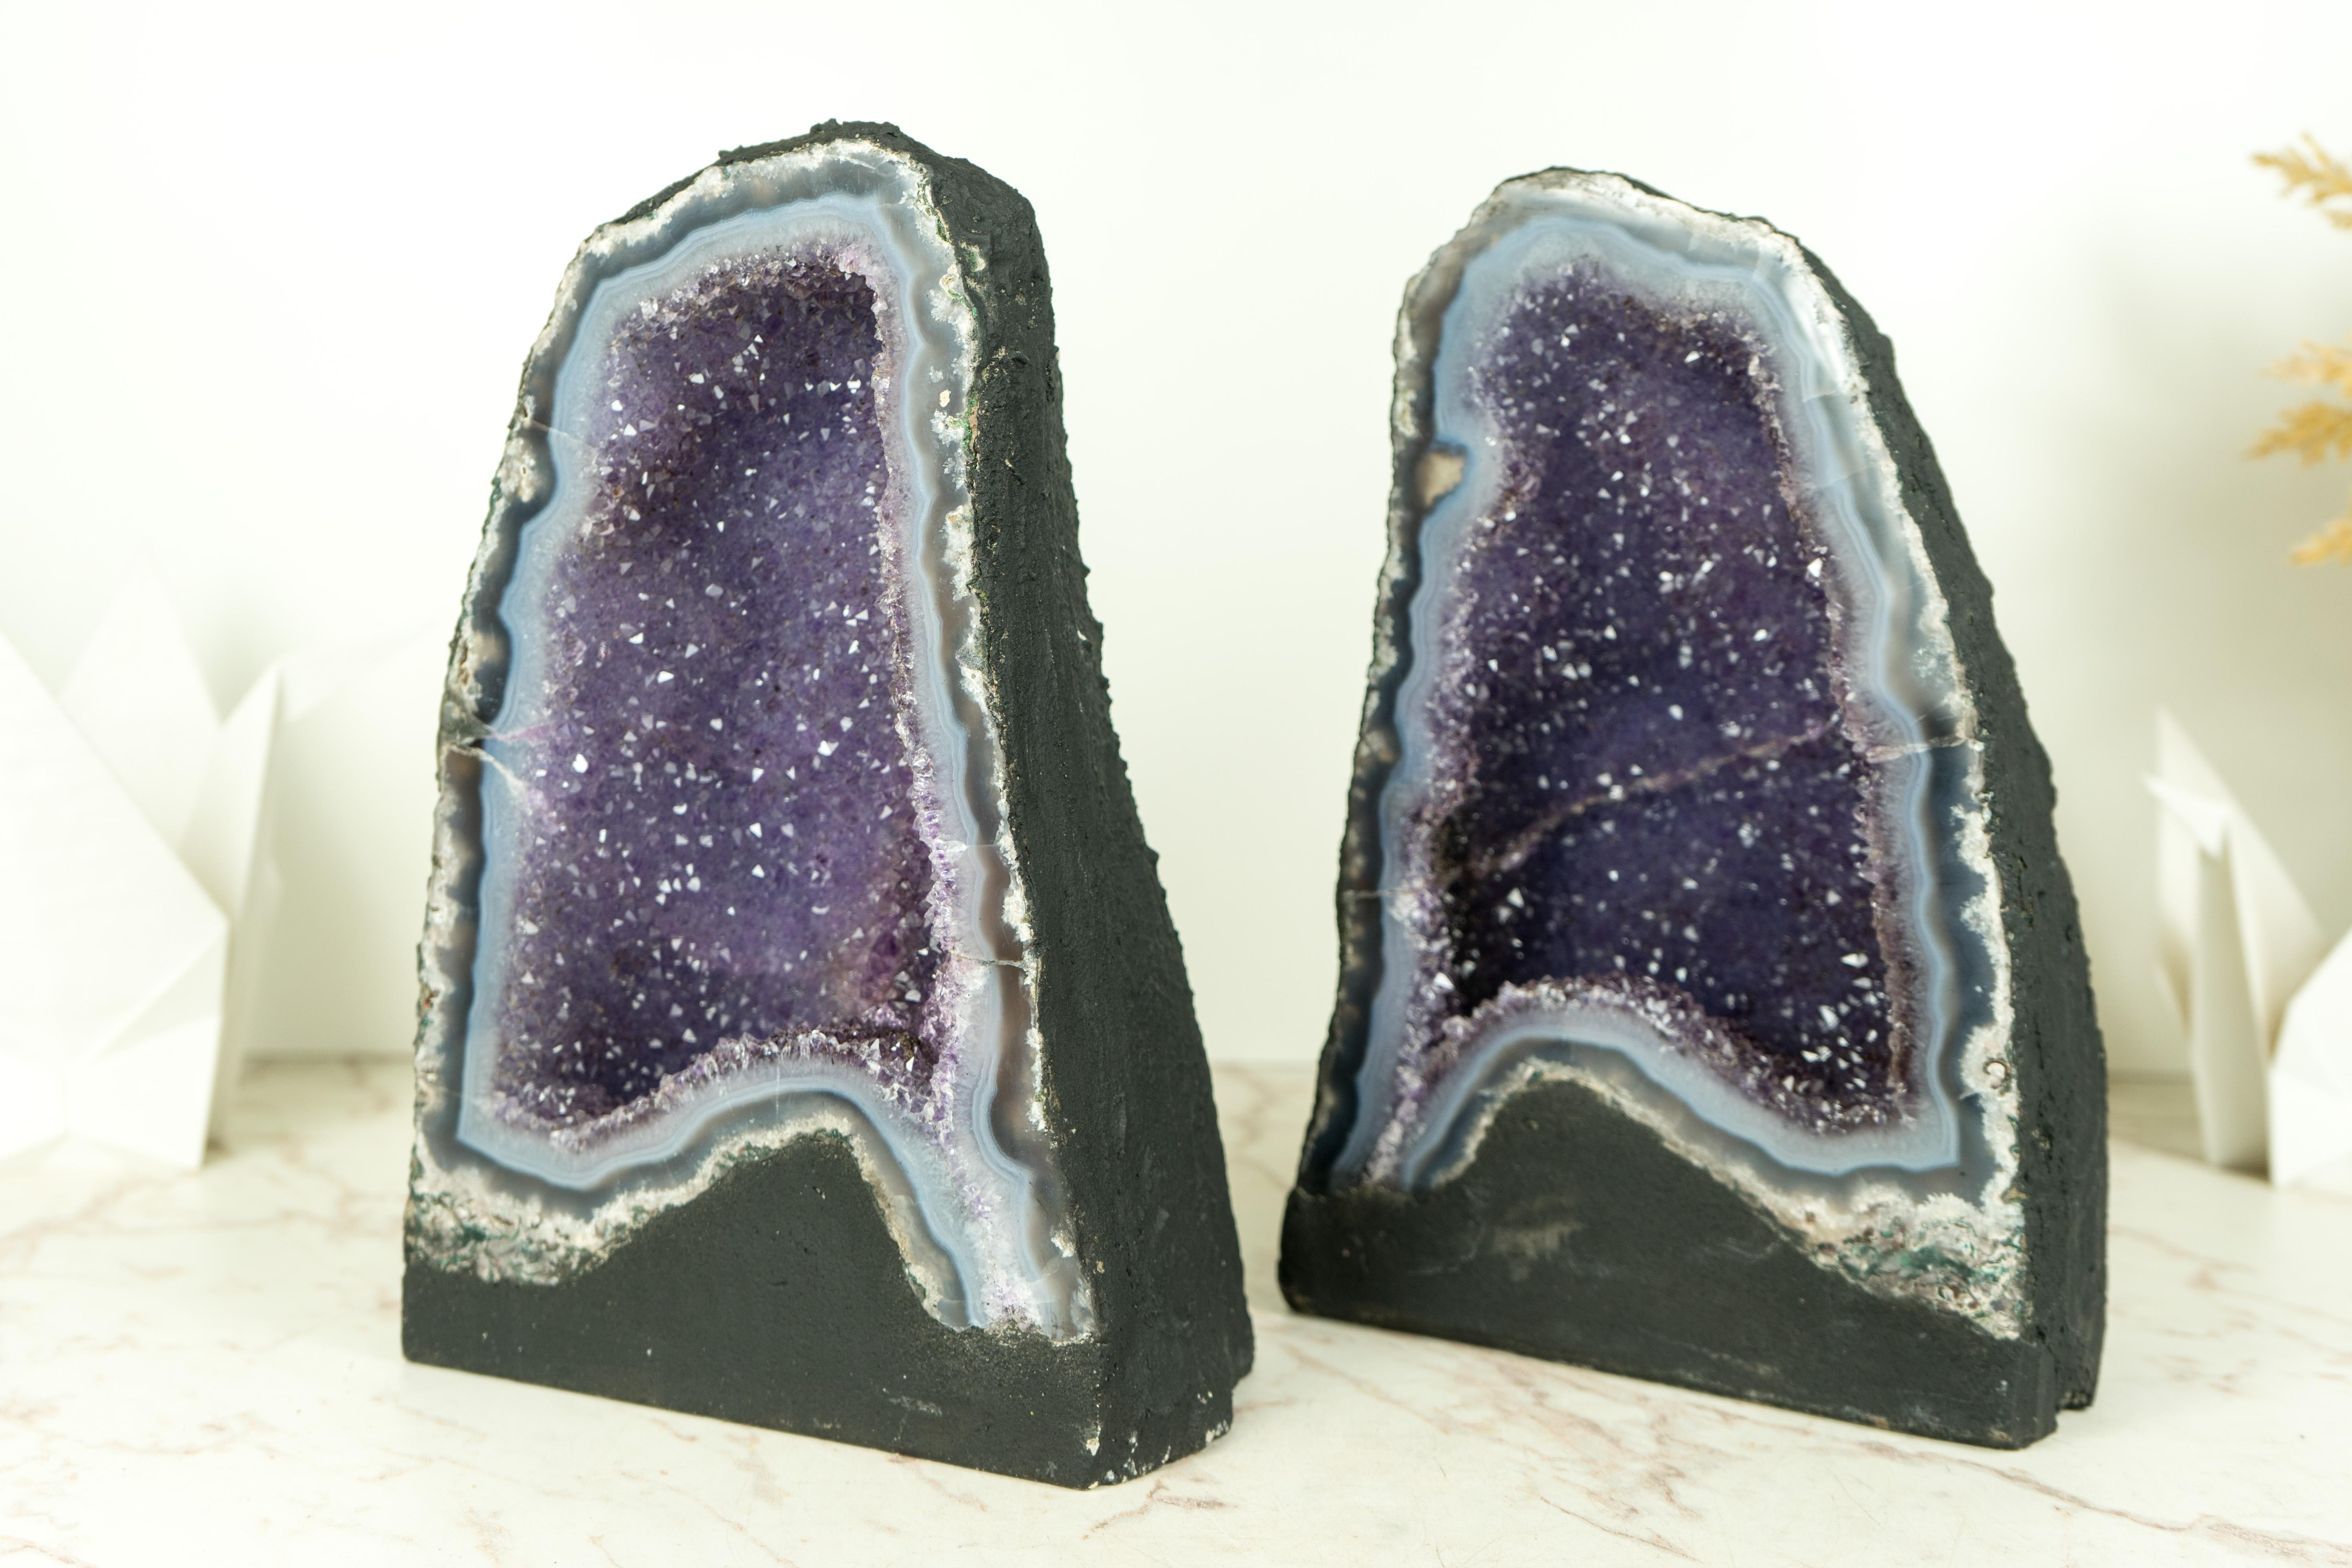 Contemporary Pair of High-Grade Small Blue Lace Agate Geodes with Sparkly Lavender Amethyst For Sale